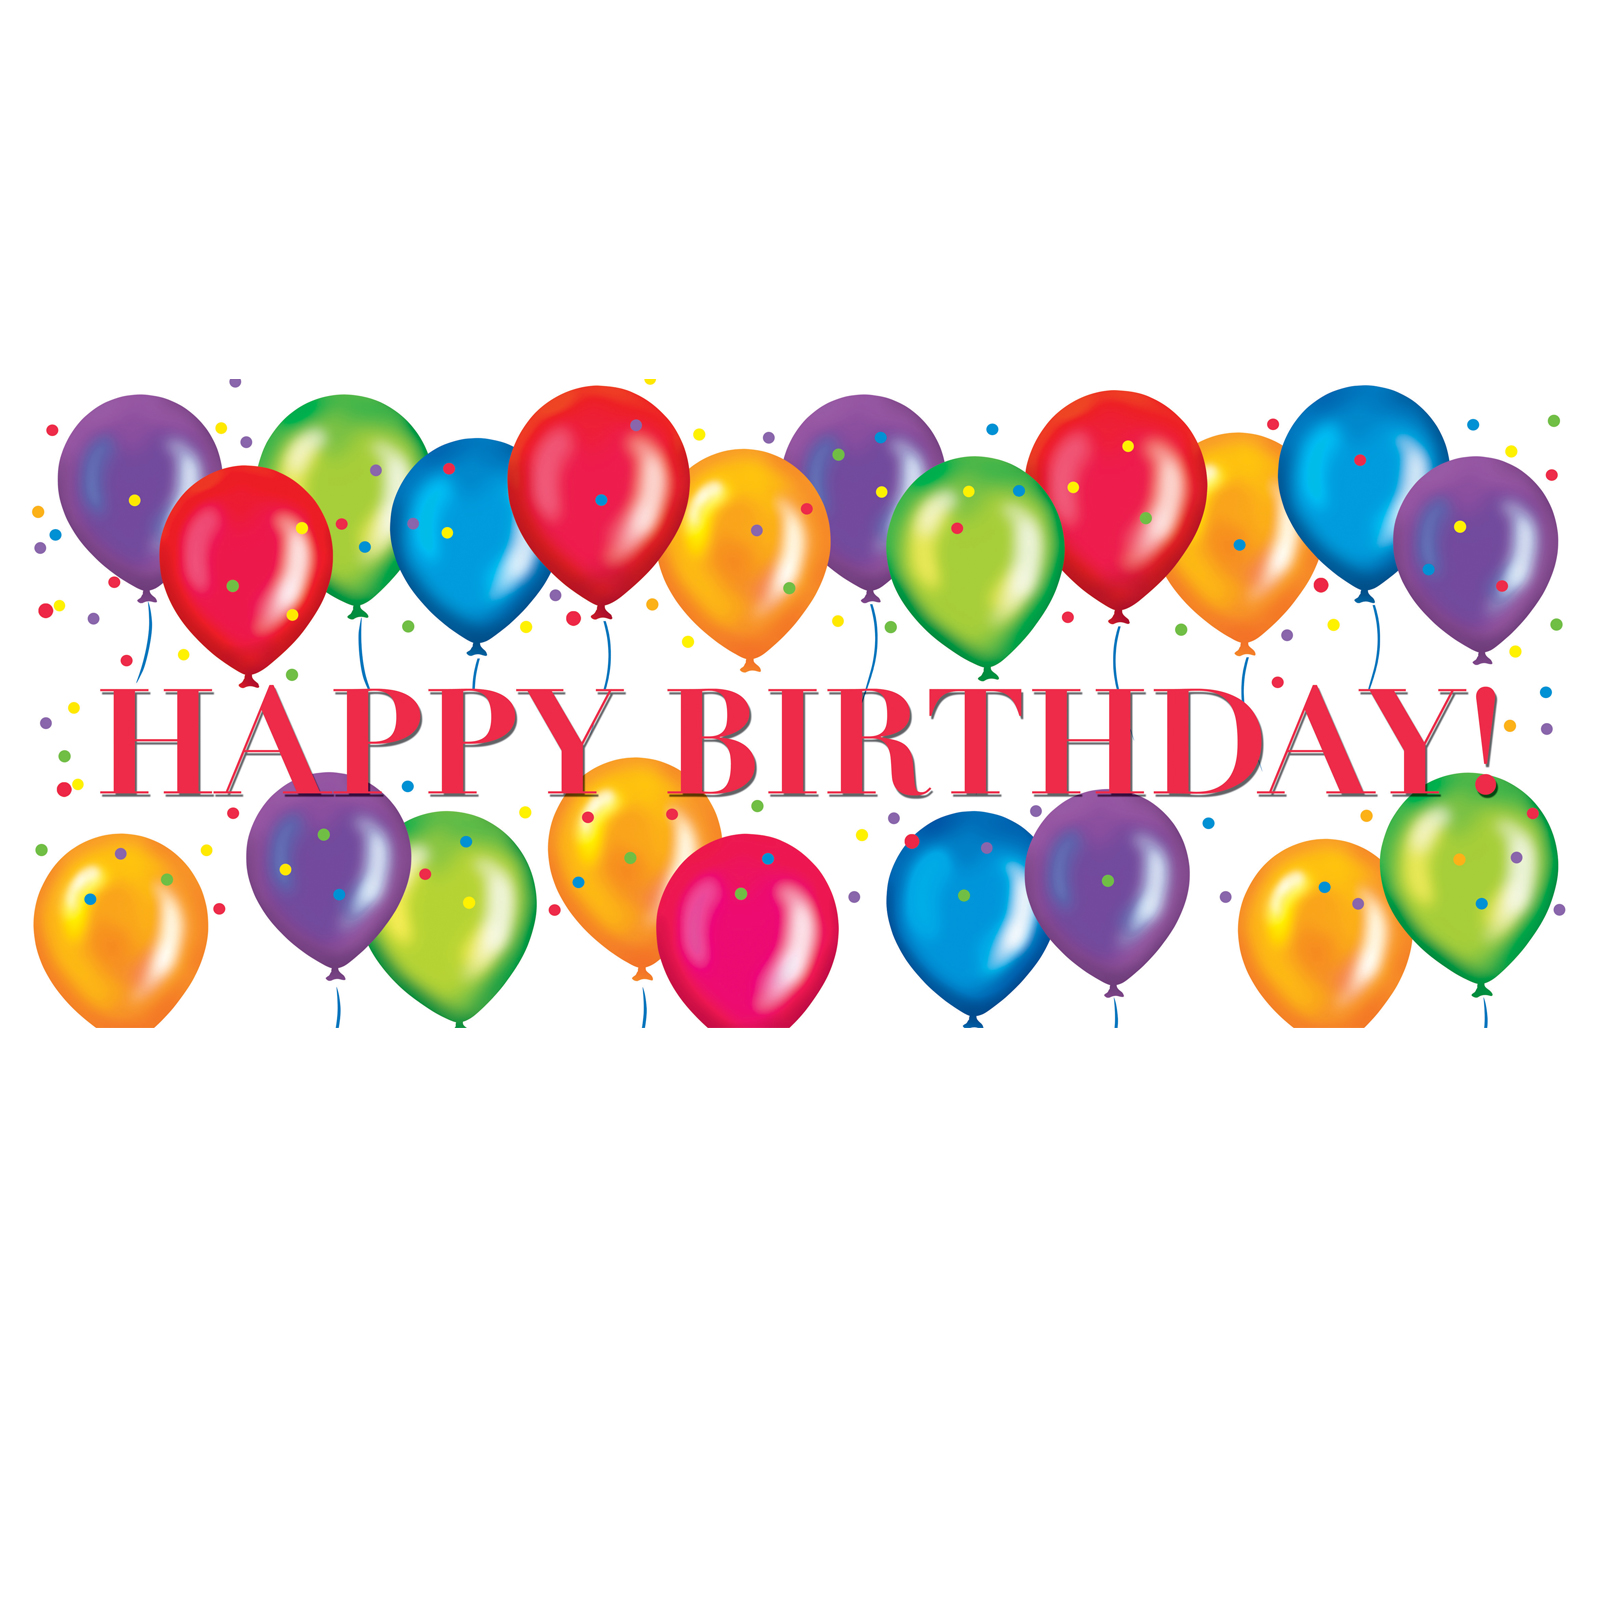 Happy 40th Birthday Wishes   Free Cliparts That You Can Download To